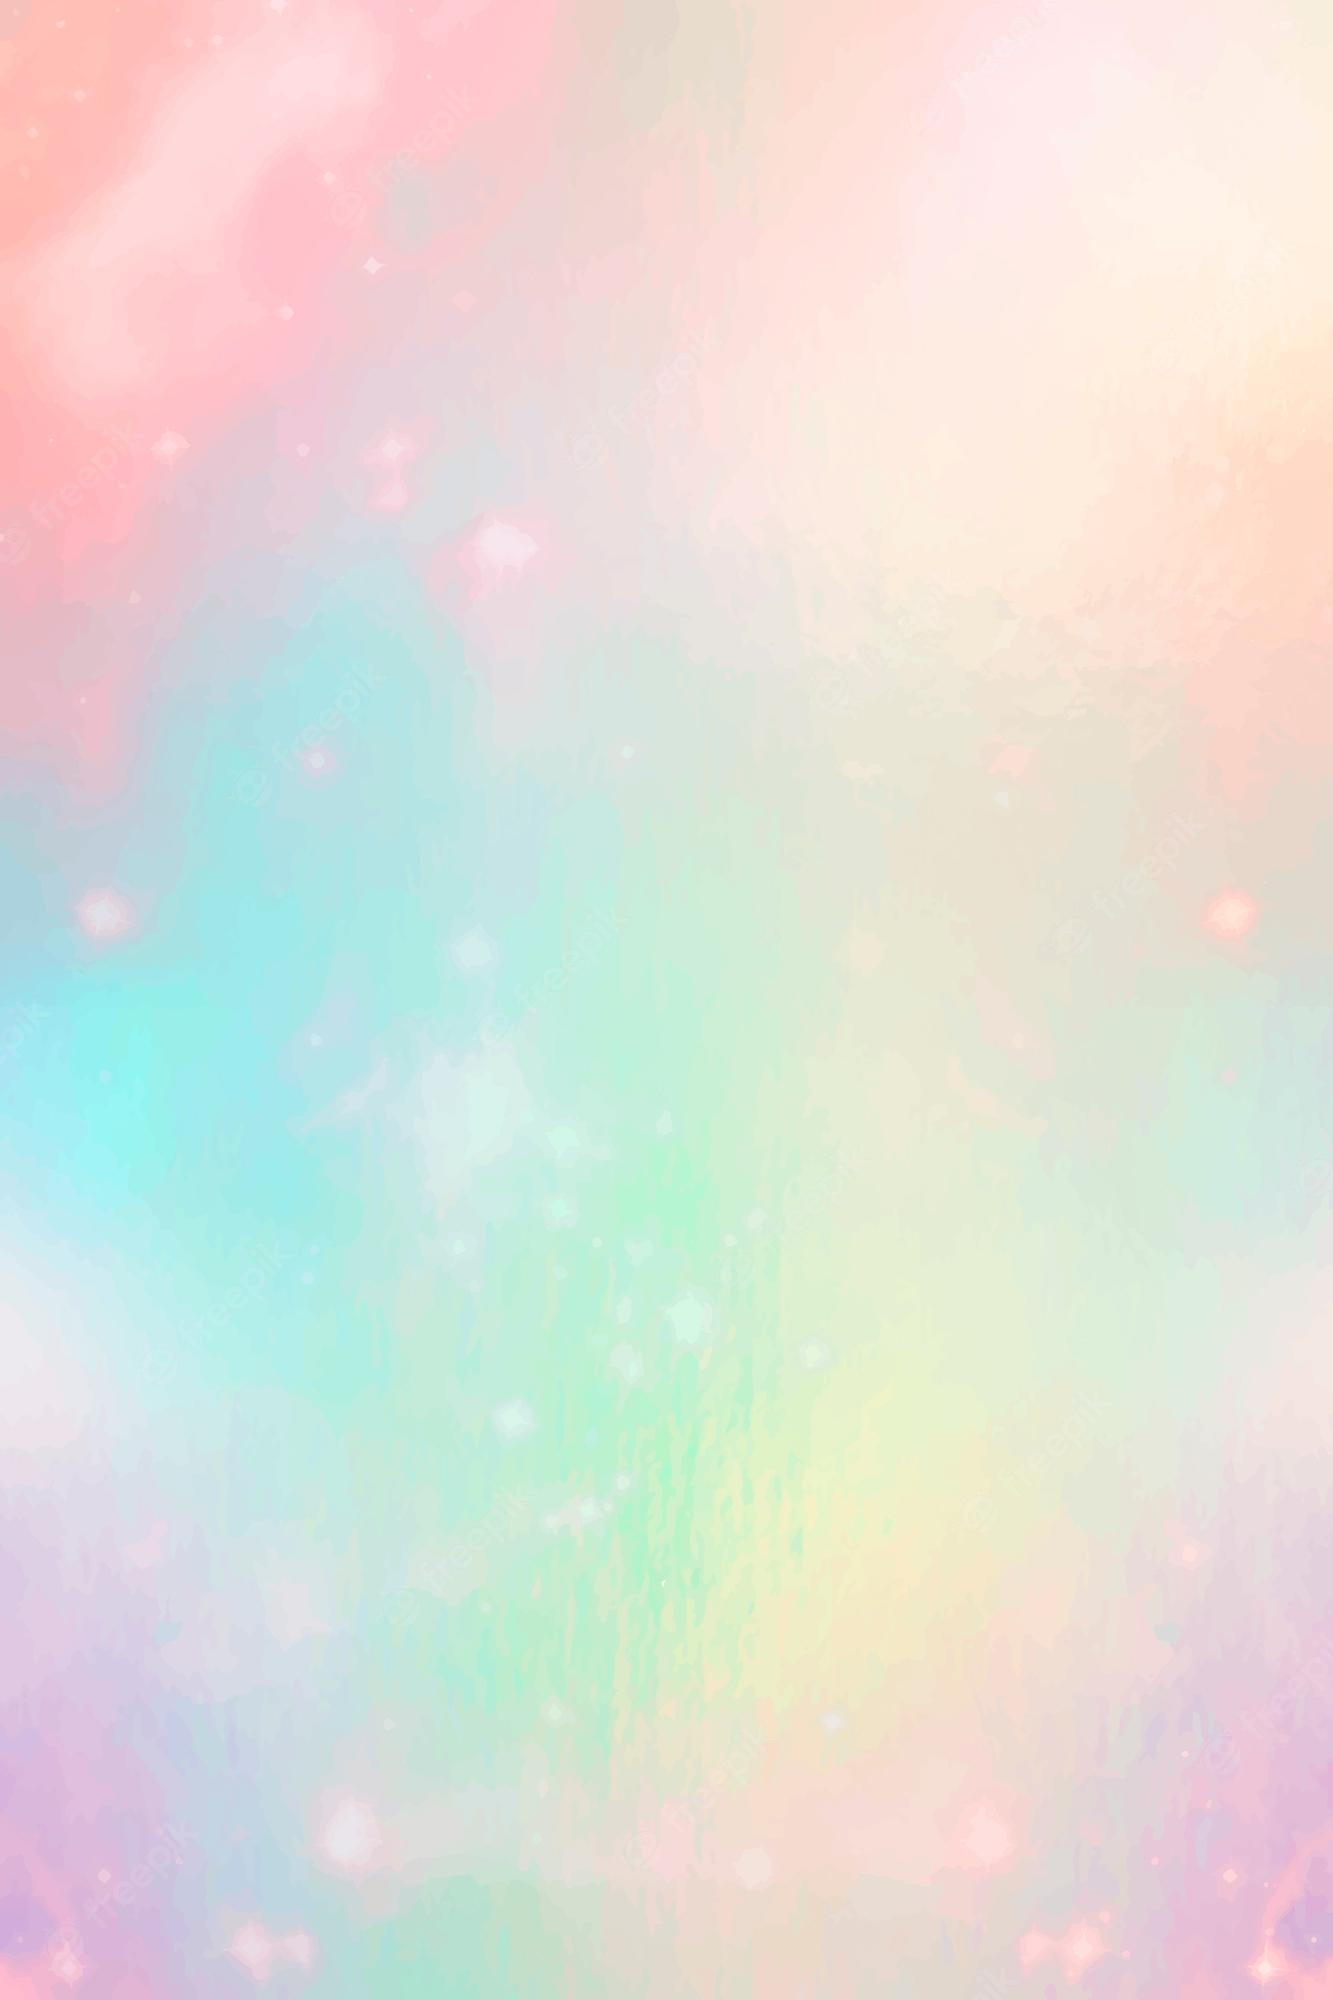 A soft pastel background with a hint of a galaxy - Pastel rainbow